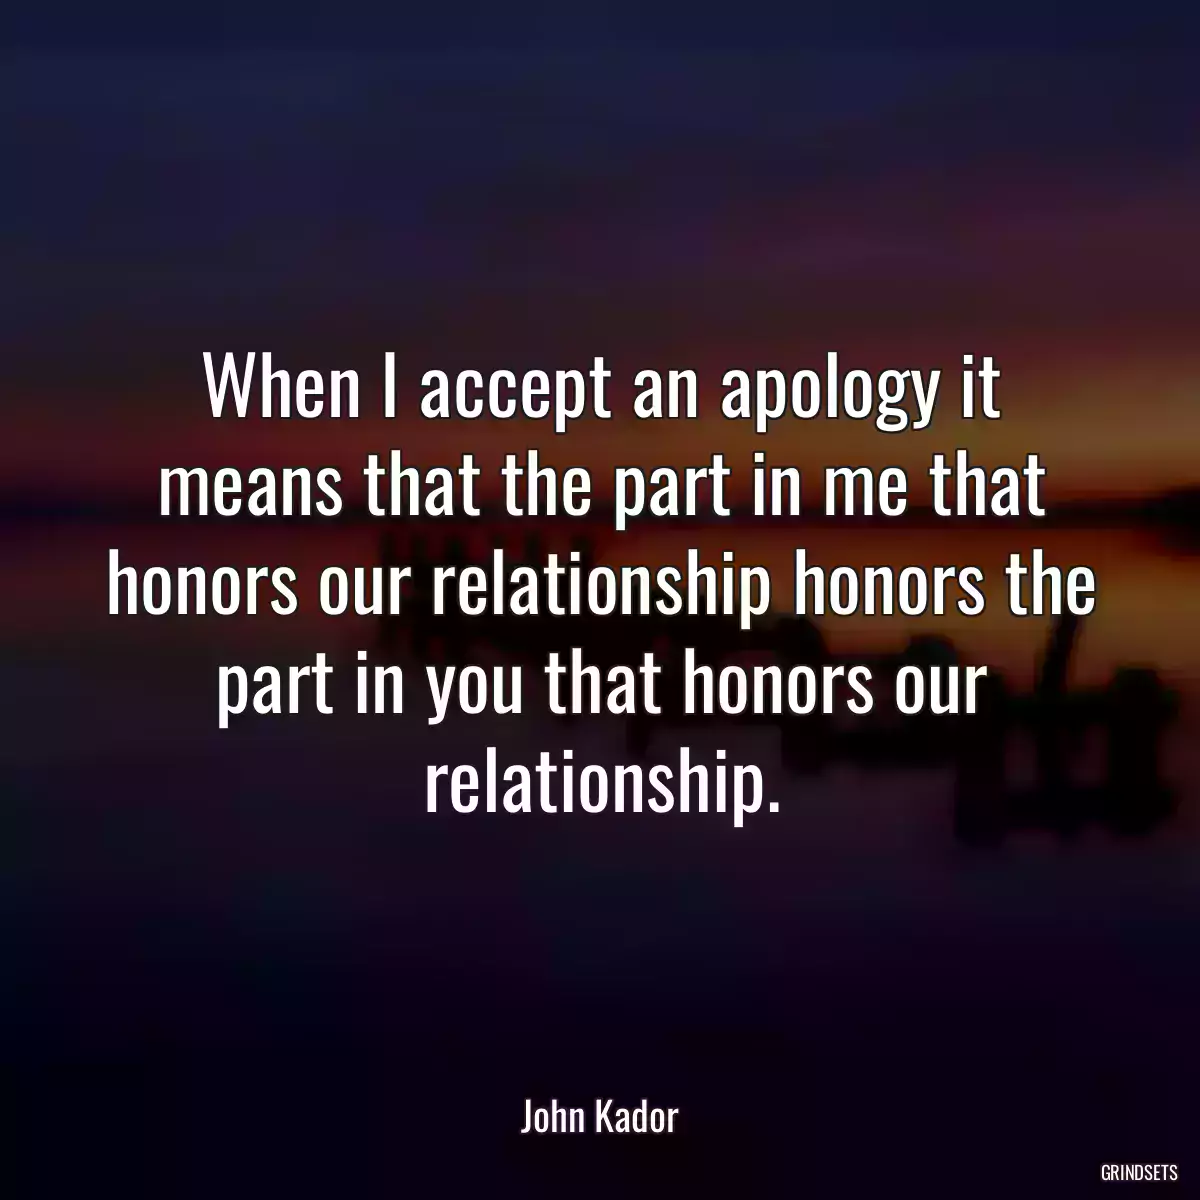 When I accept an apology it means that the part in me that honors our relationship honors the part in you that honors our relationship.